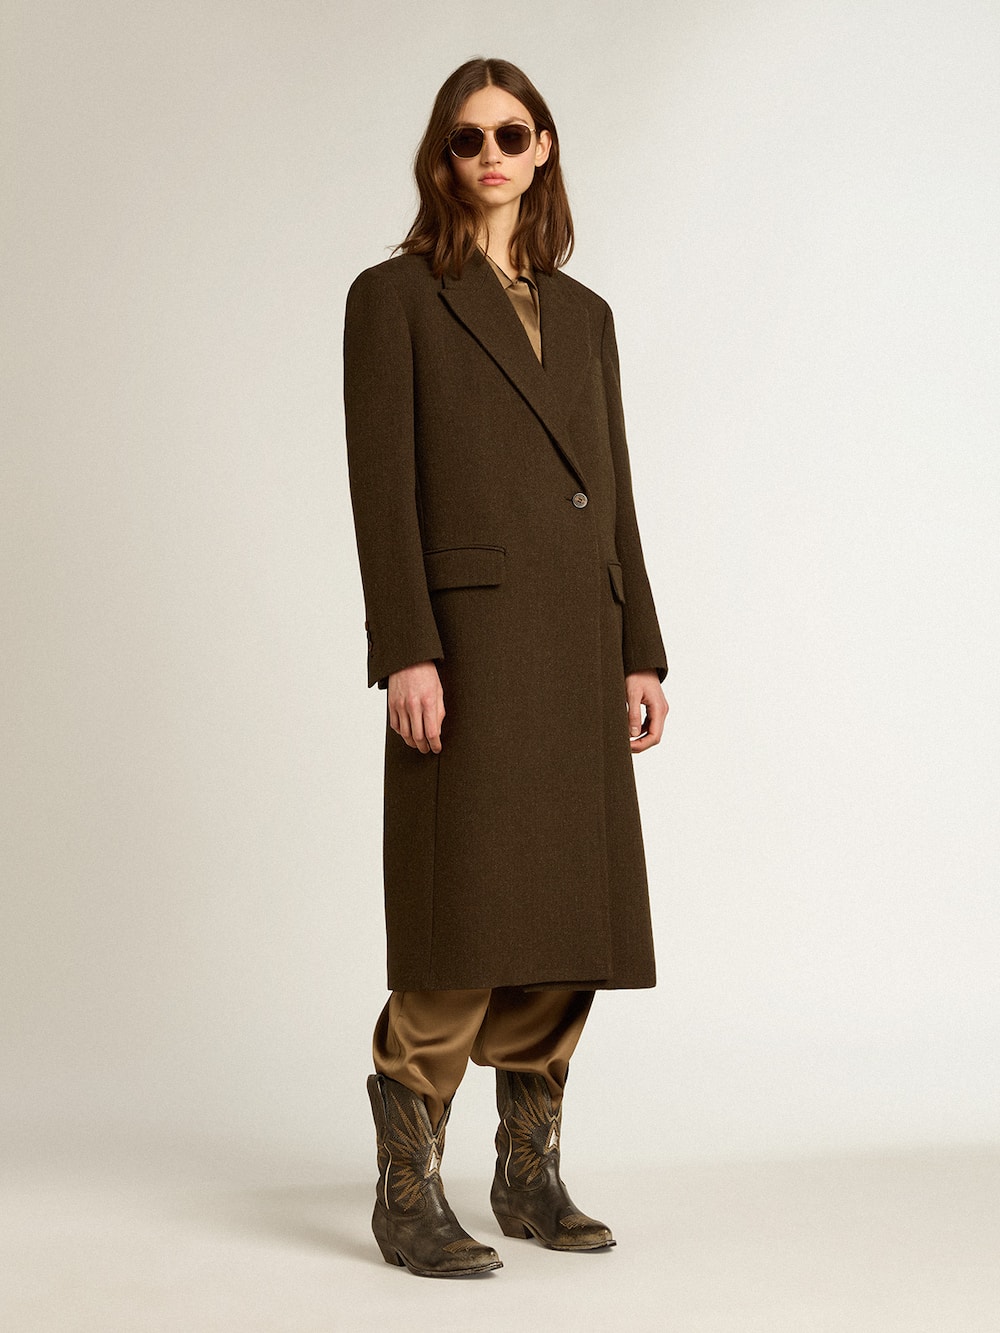 Golden Goose - Women’s one-and-a-half-breasted coat in bark-colored wool in 